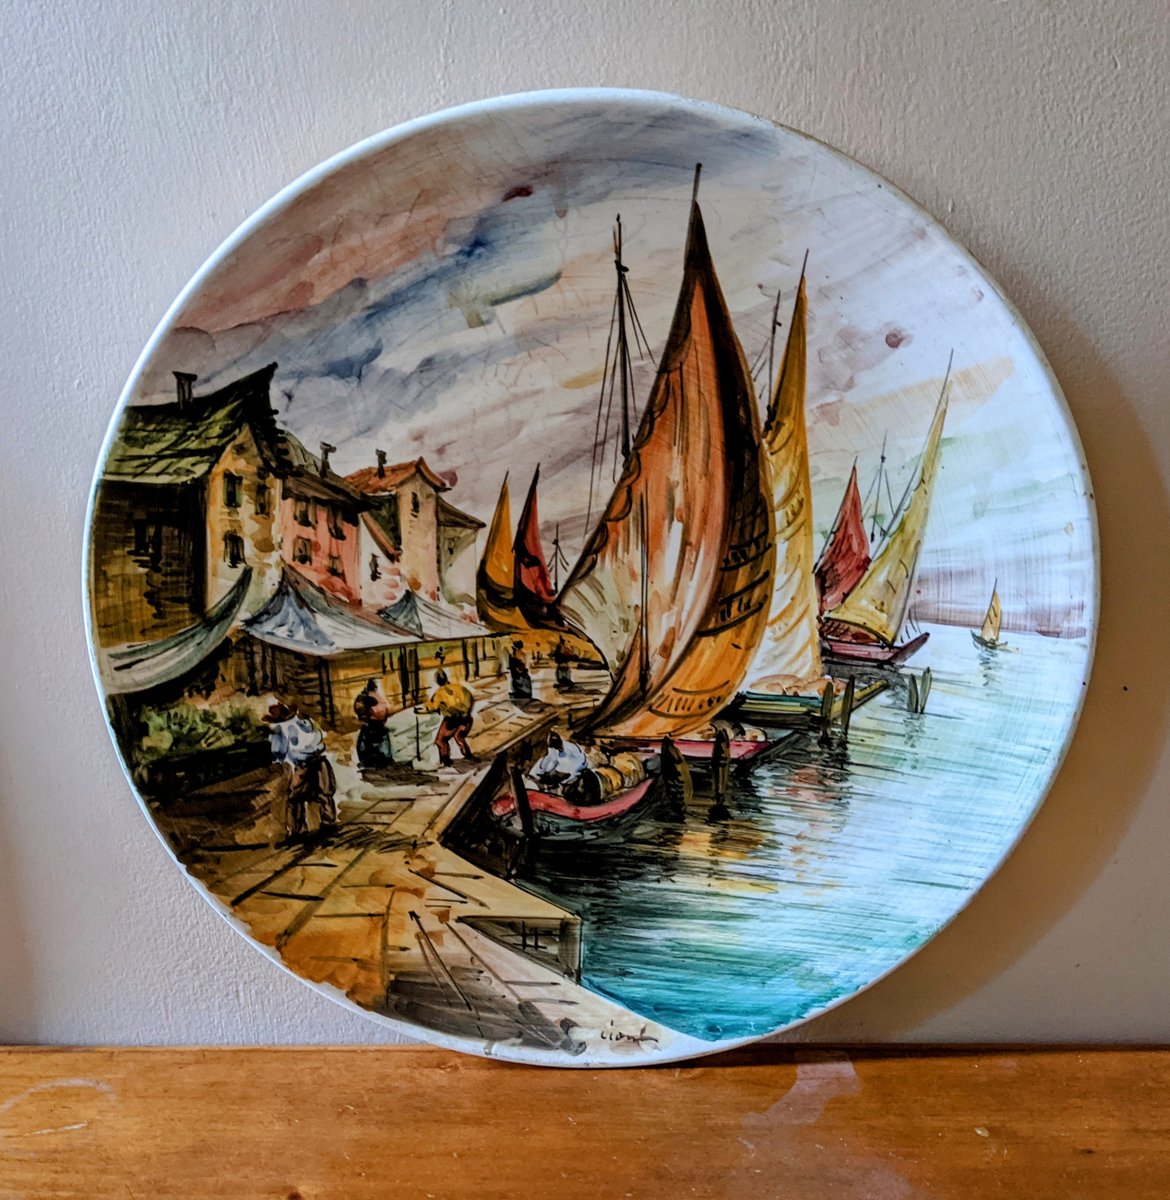 I love these plates!  I'm trying to stay away from heavy pieces, but I couldn't resist!  Handpainted, Italian and Spectacular!!!  At 15' they will definitely draw attention.  This whimsical thing is a tough road.  I buy what grabs me and it isn't always practical.